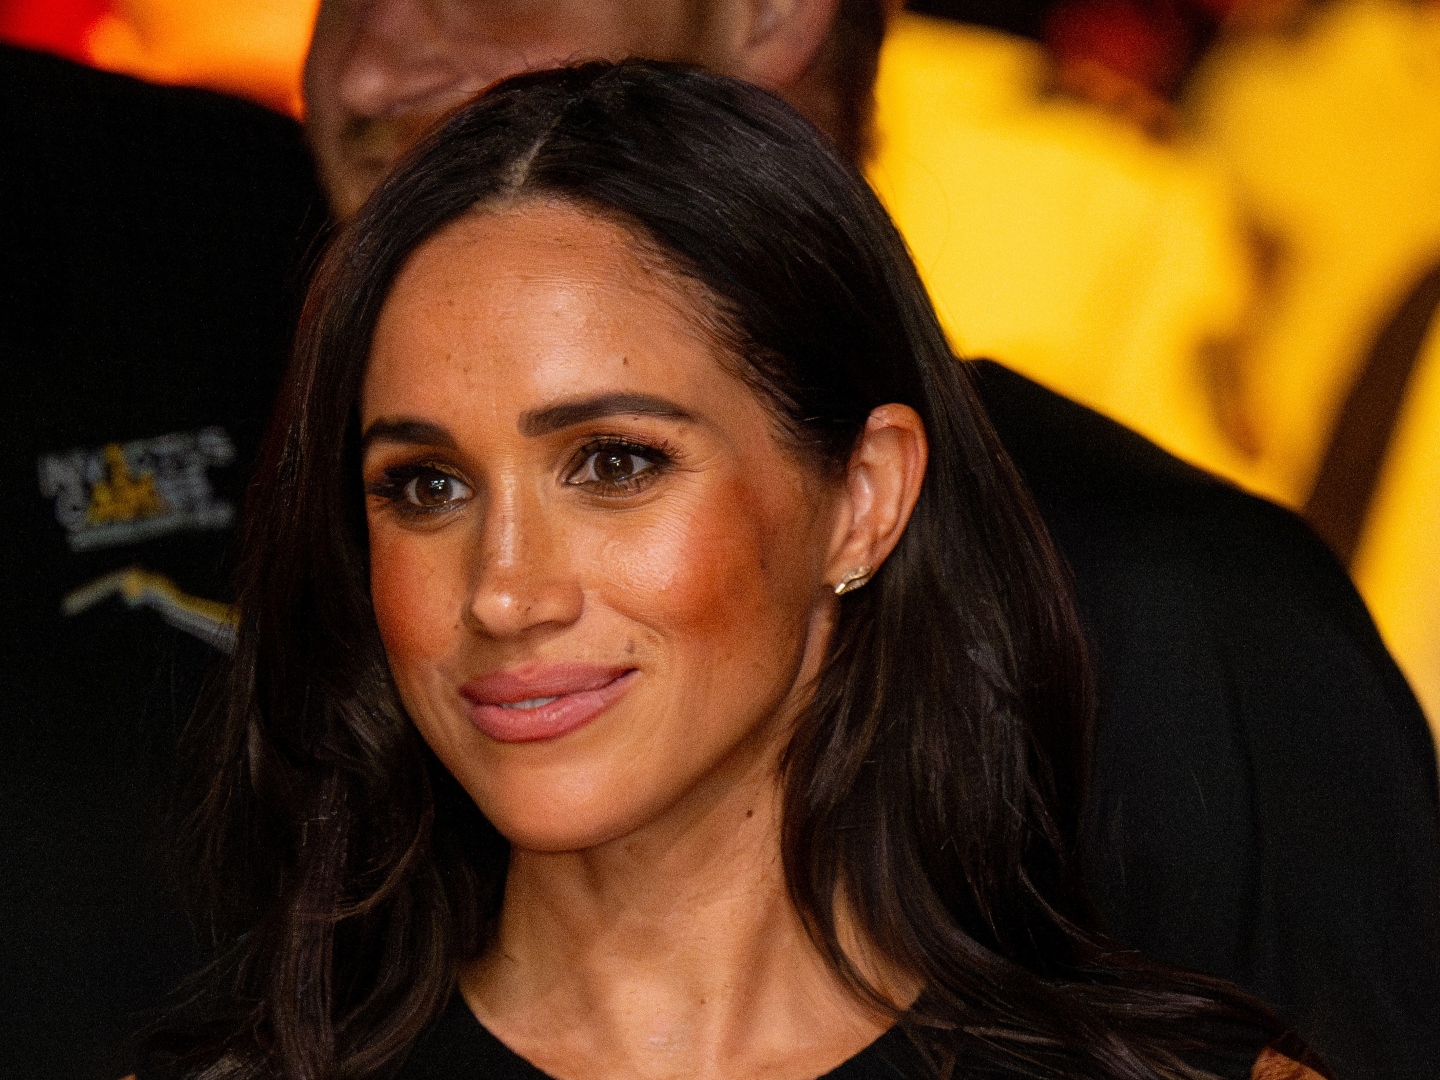 eghan Markle, Duchess of Sussex during a medal ceremony on day 4 of Invictus Games 2023 at the Merkur Spiel-Arena in Dusseldorf. 13 Sep 2023